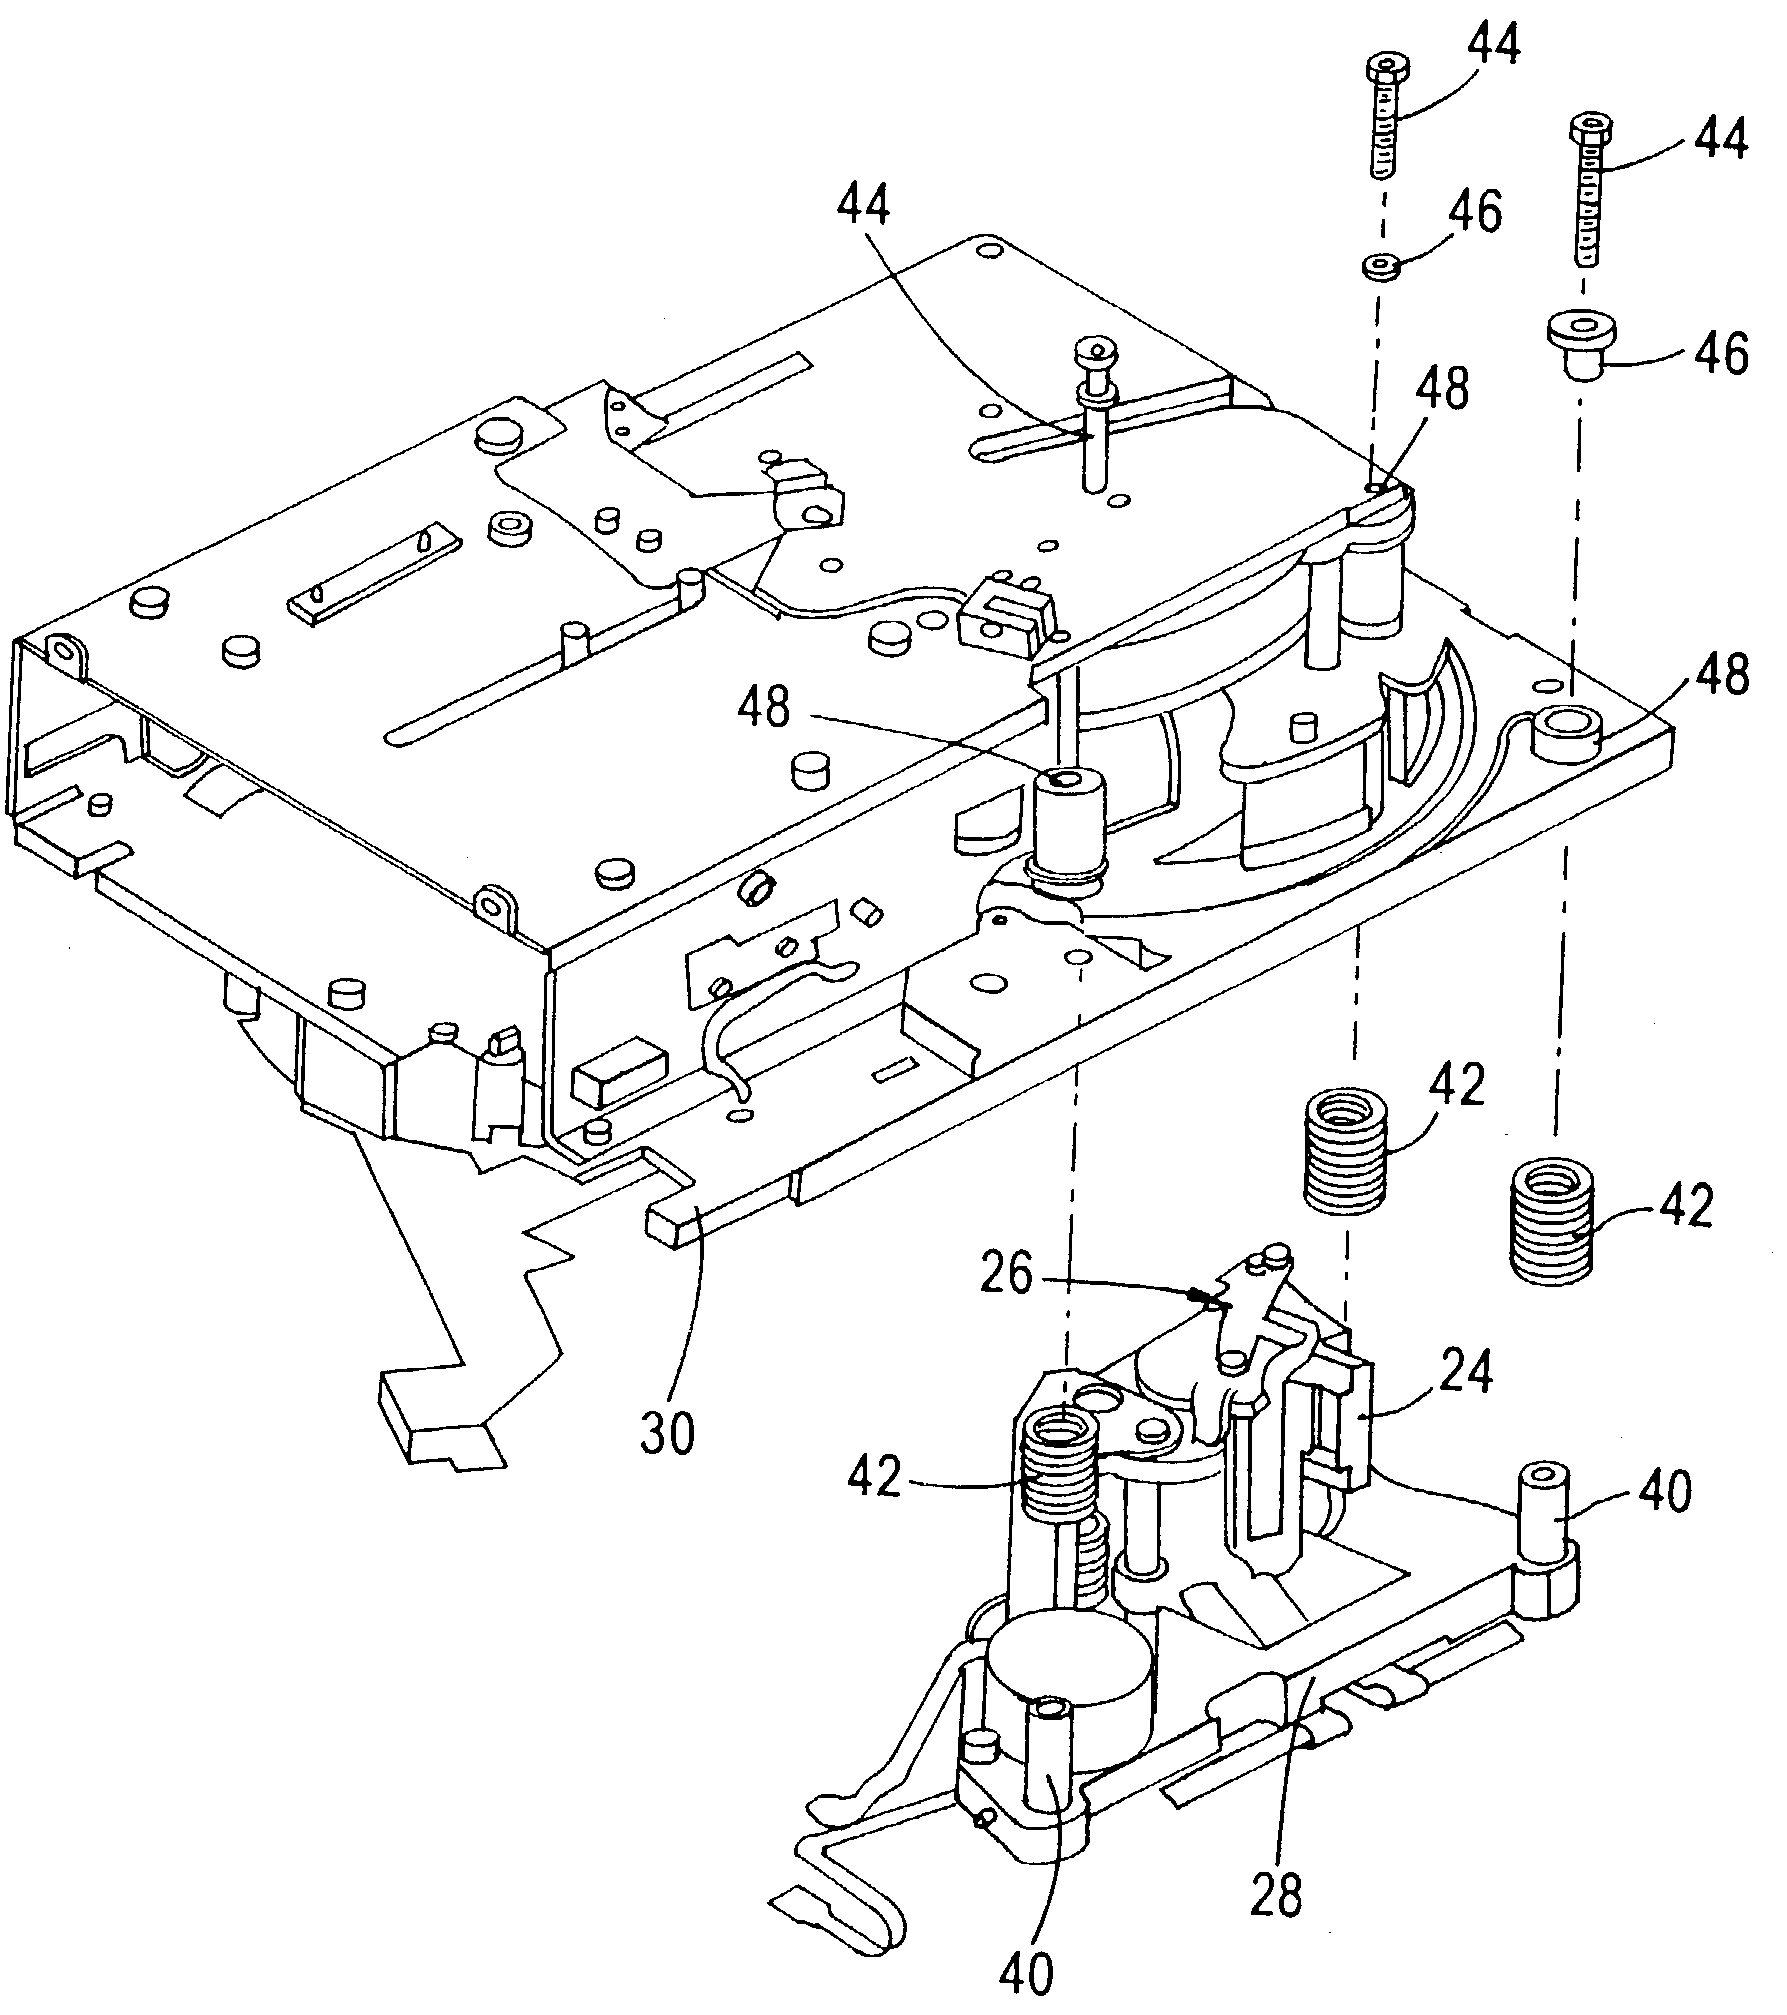 Tape drive apparatus with a head alignment system